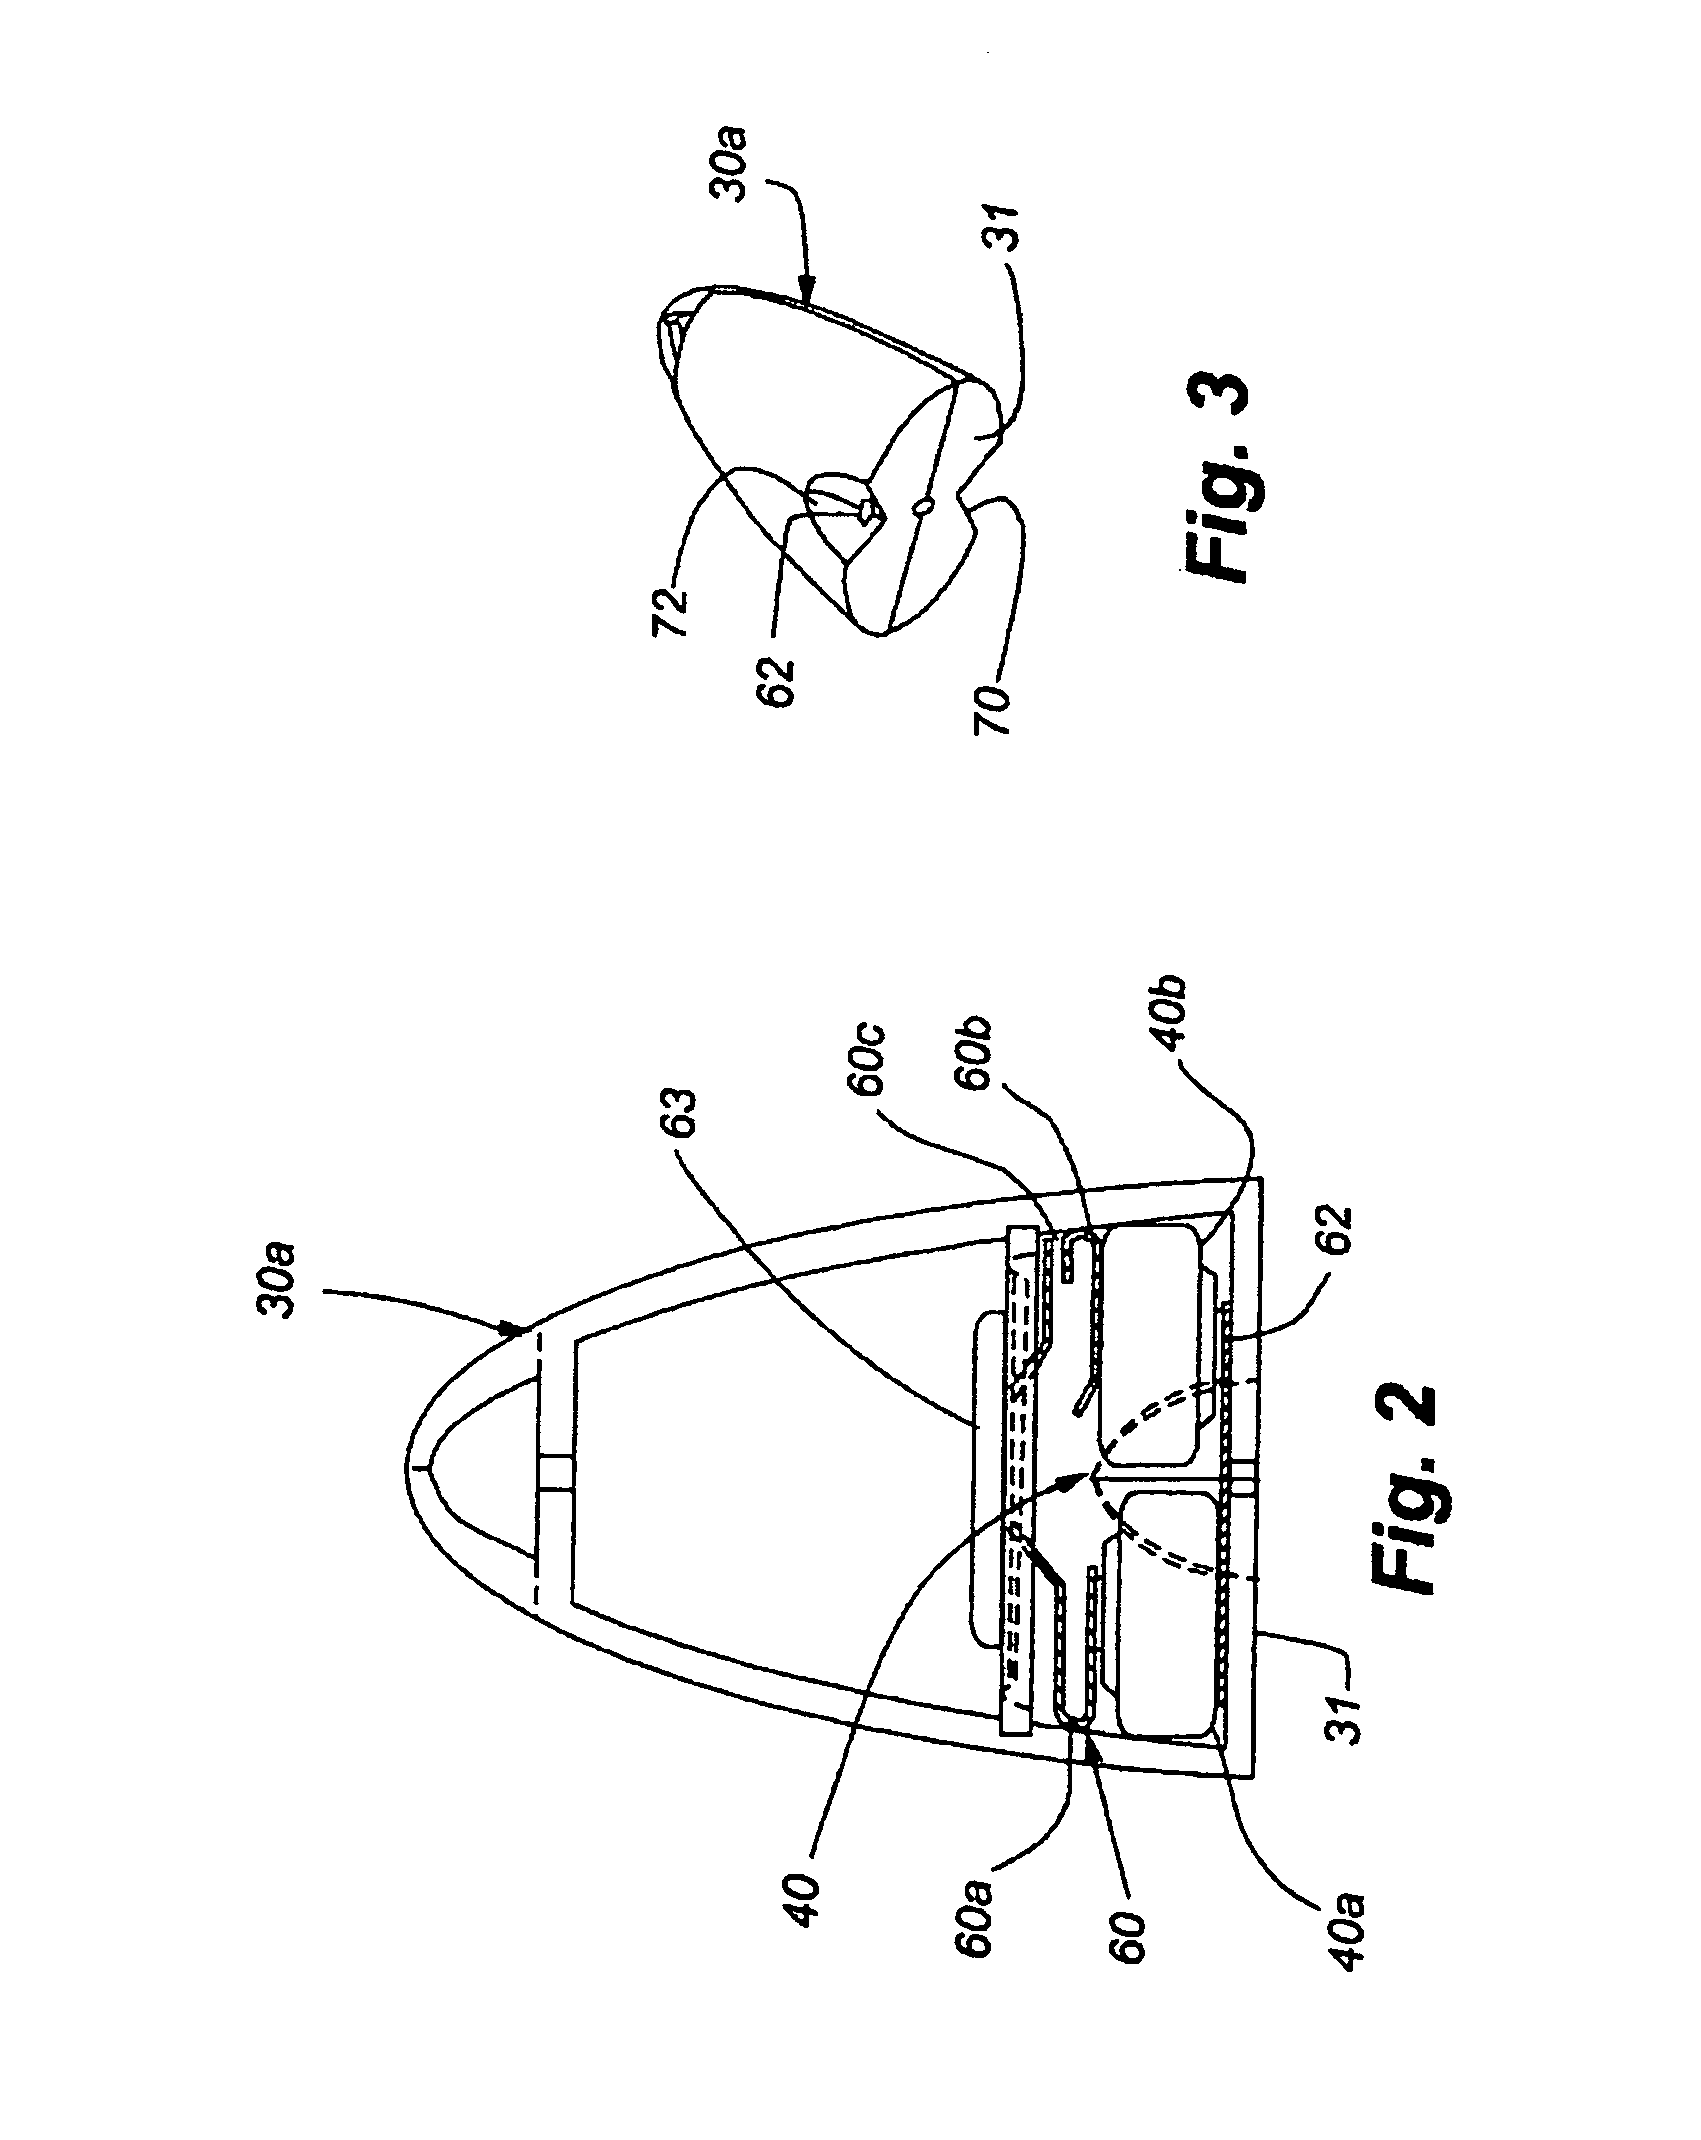 Method and apparatus for vaporizing a compound